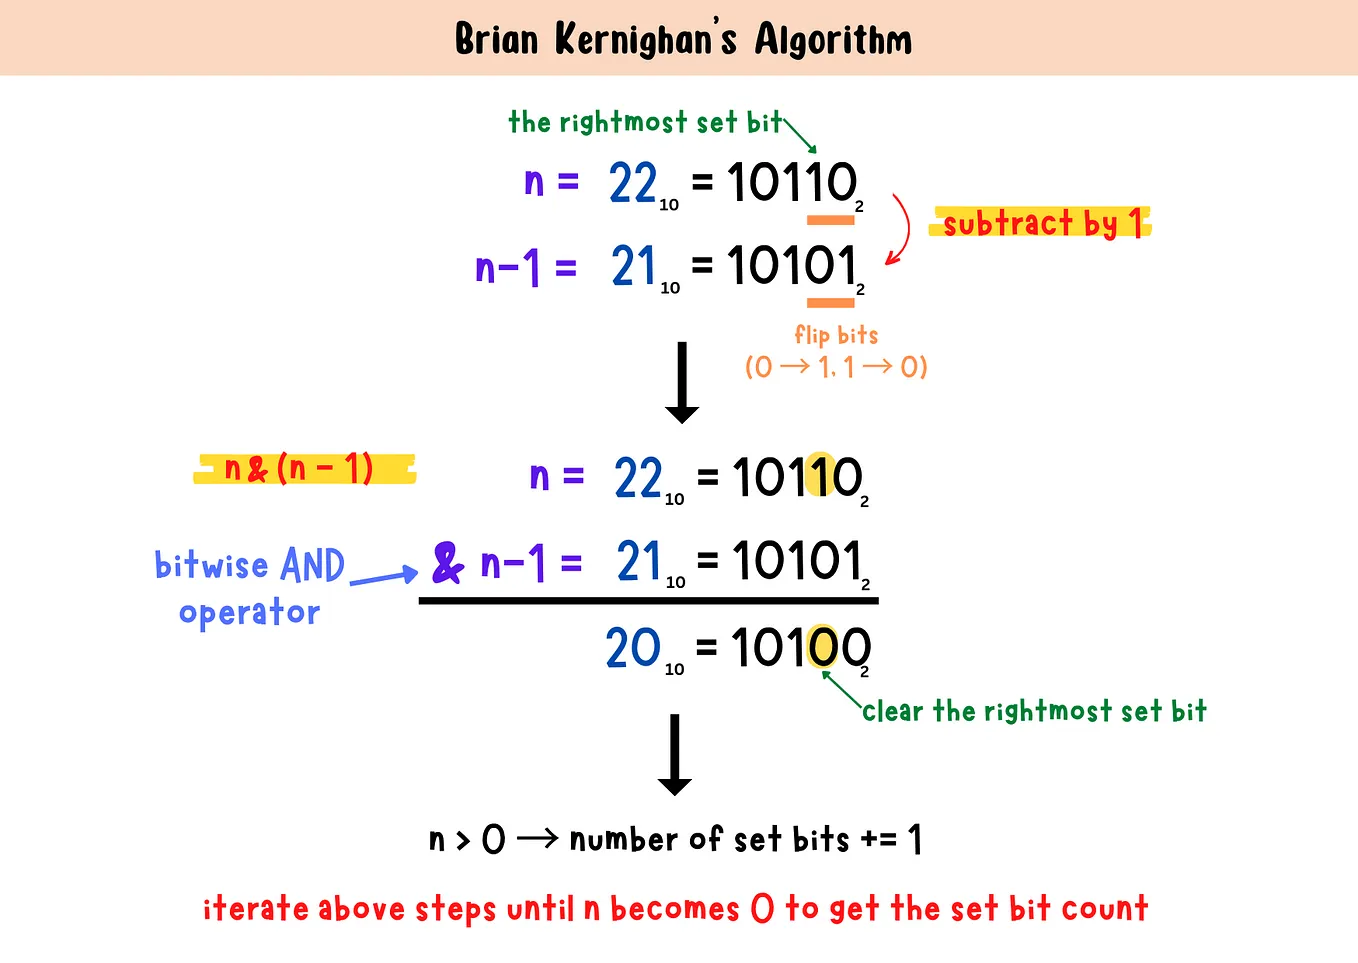 Brian Kernighan’s Algorithm: Count set bits in a number